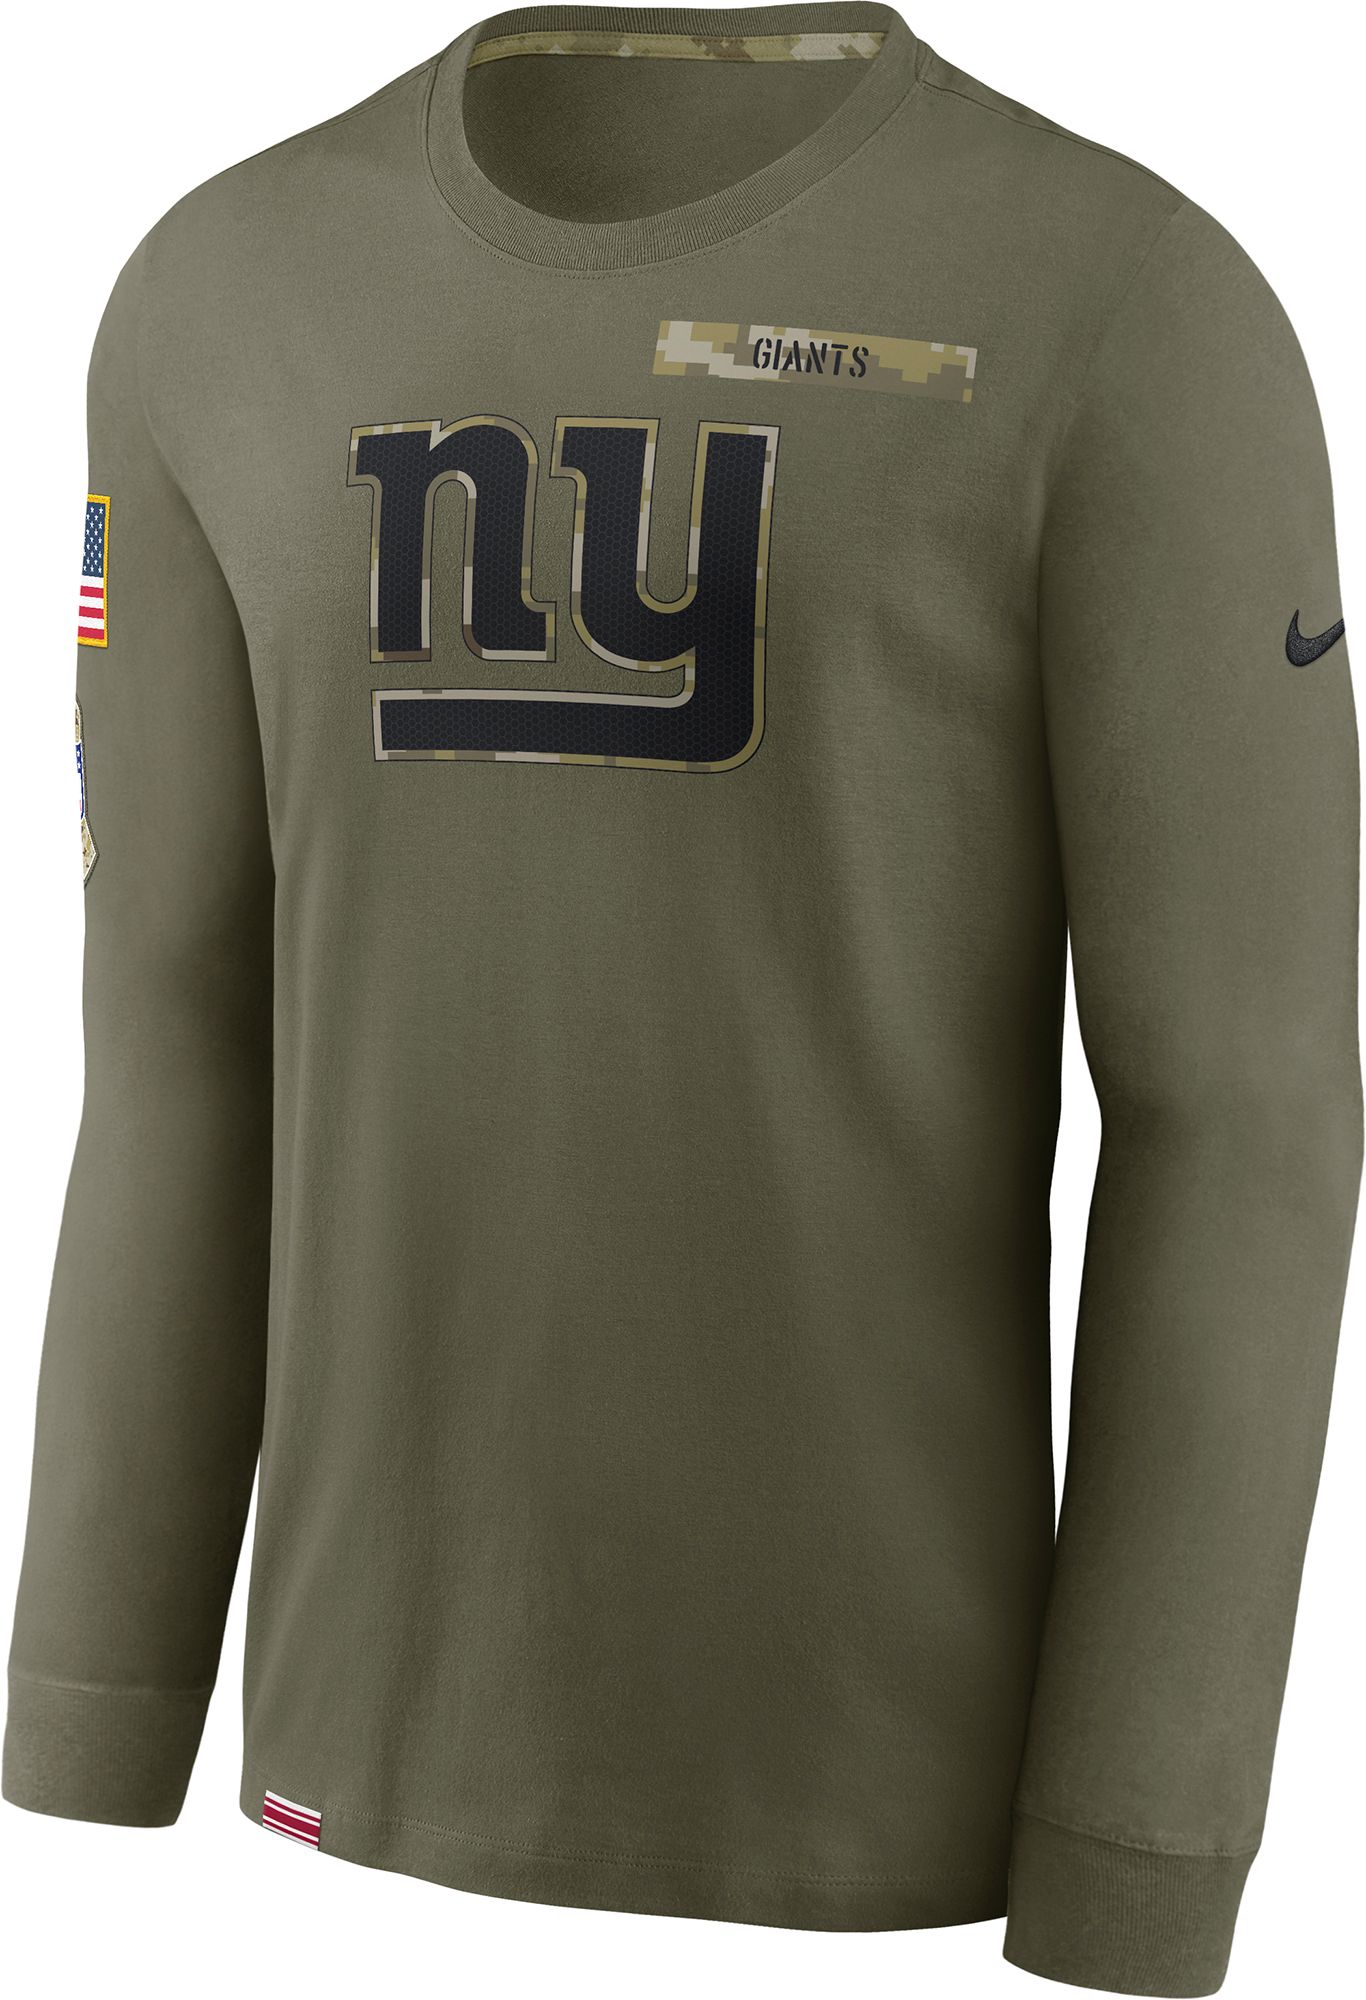  New York Long Sleeve T Shirt for Women and Mens NYC